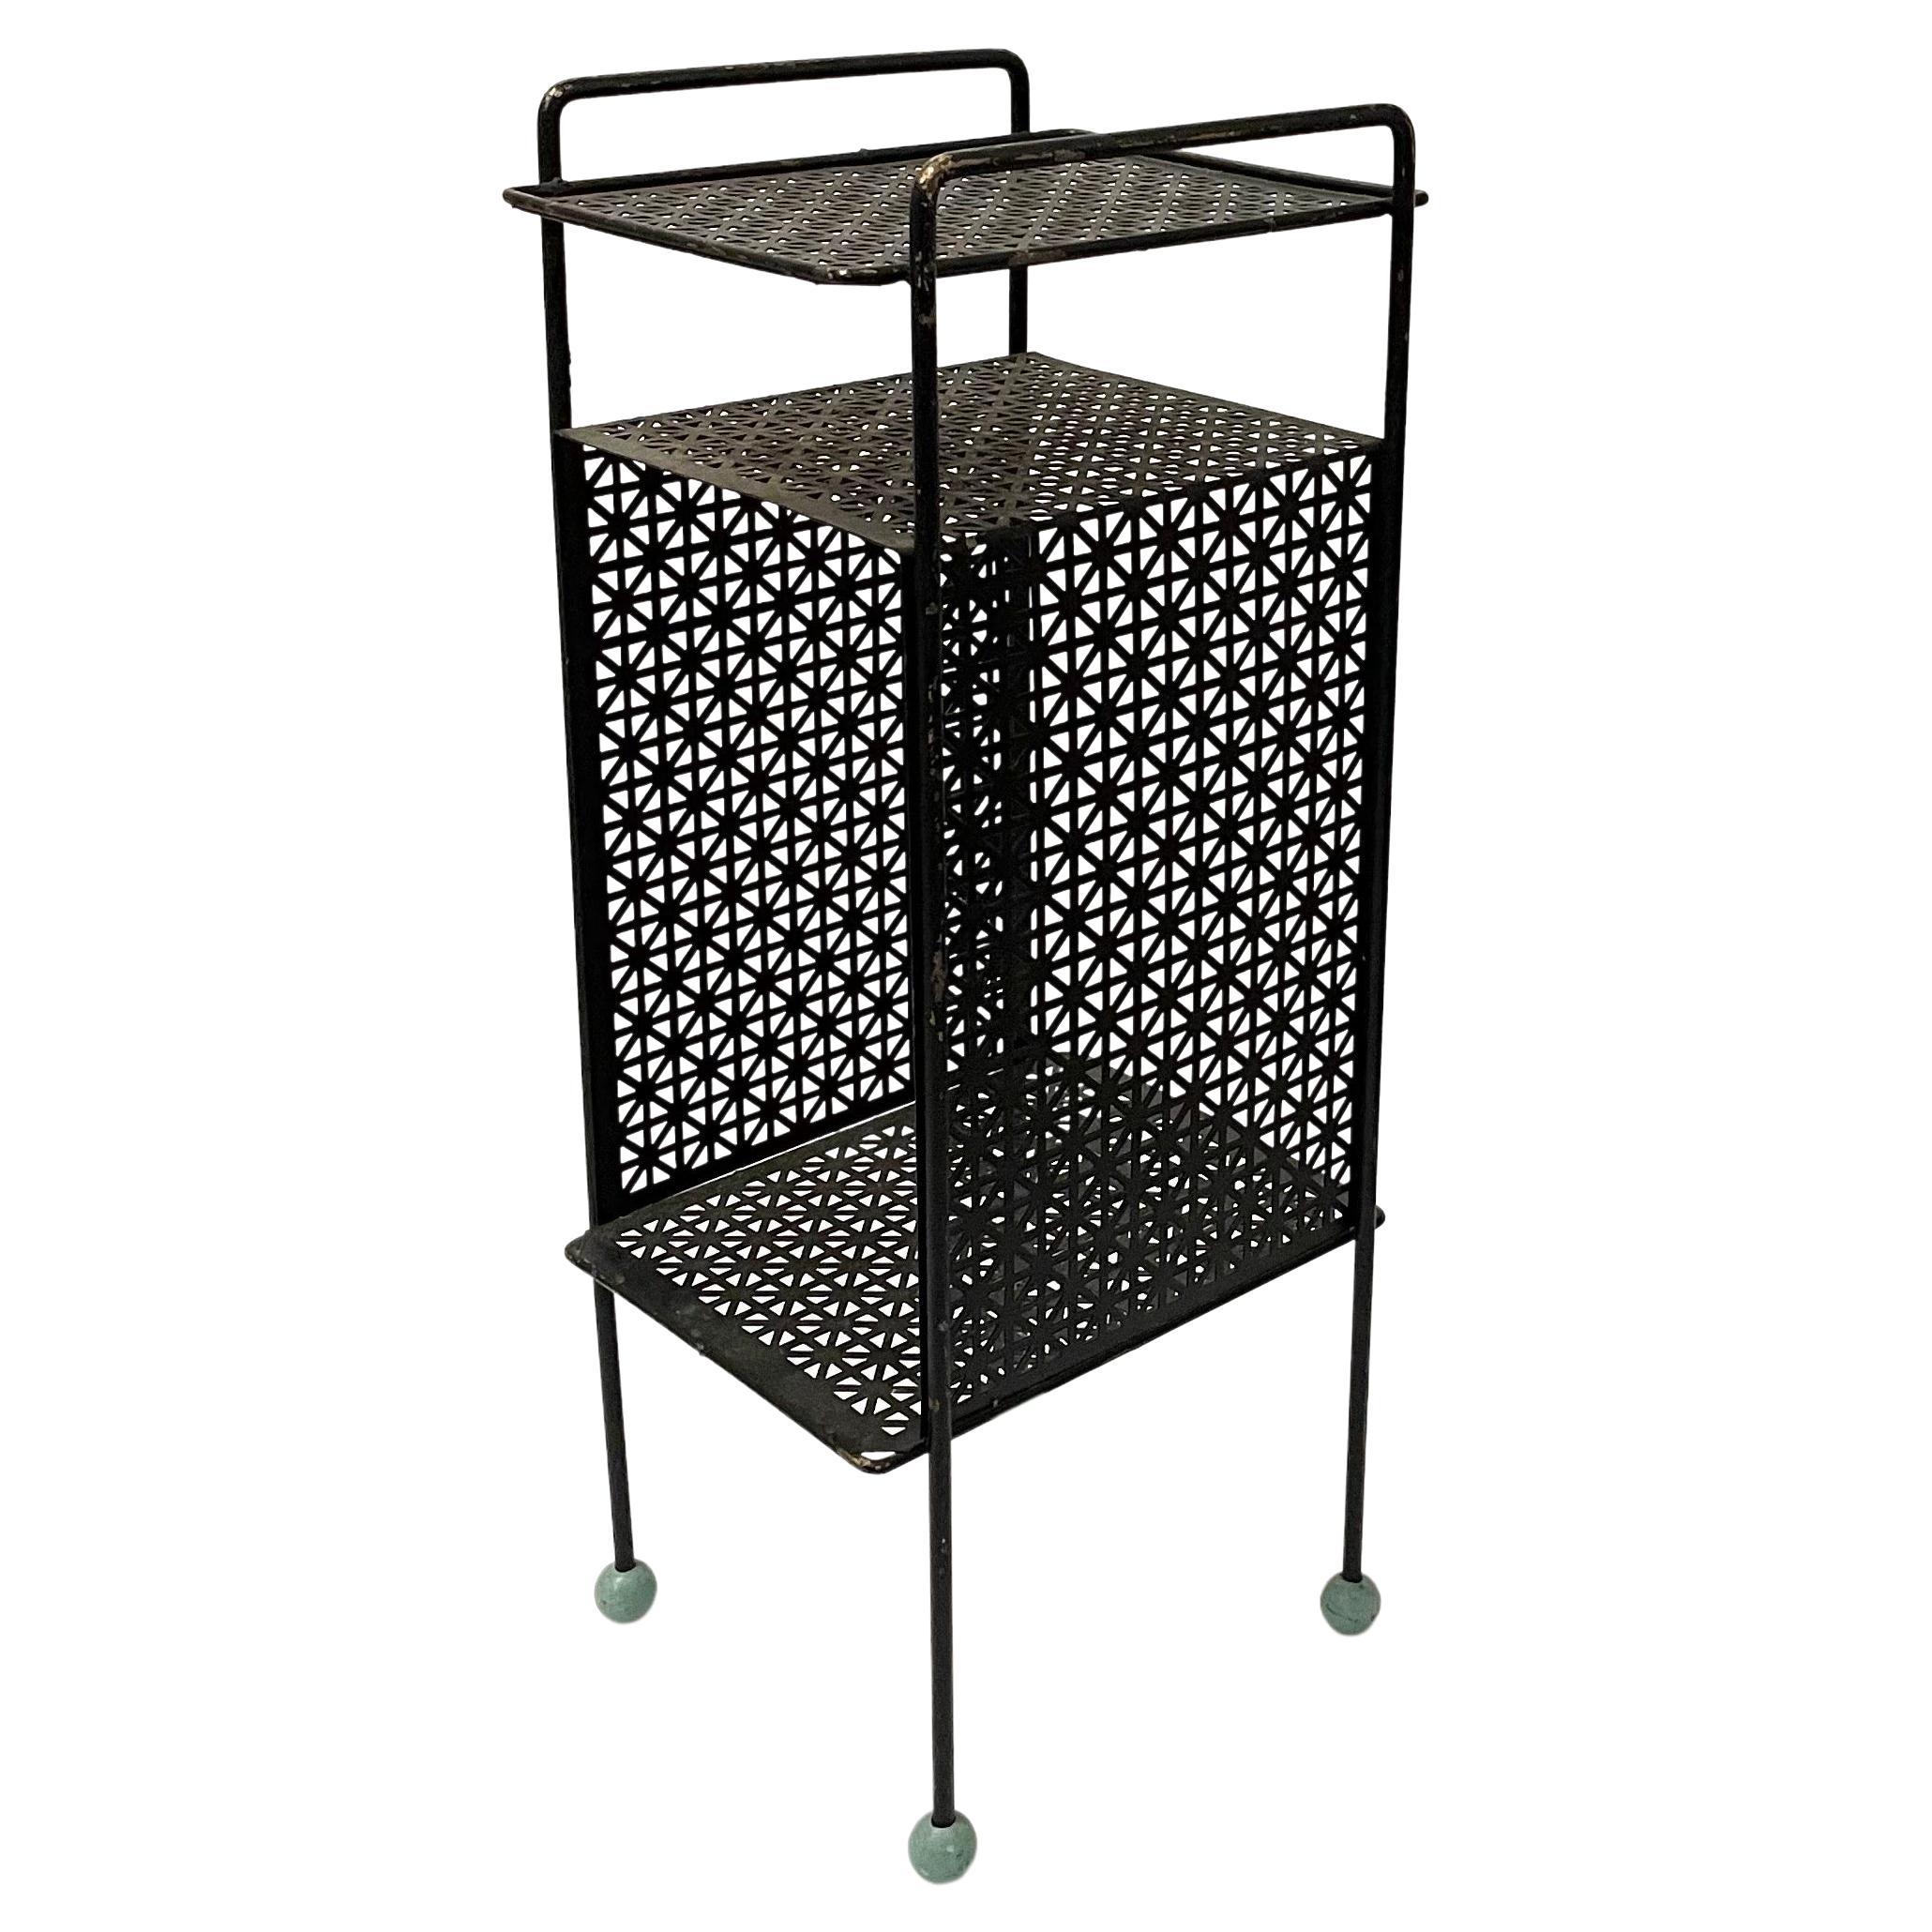 Atomic Age Perforated Metal Record/Telephone Stand For Sale